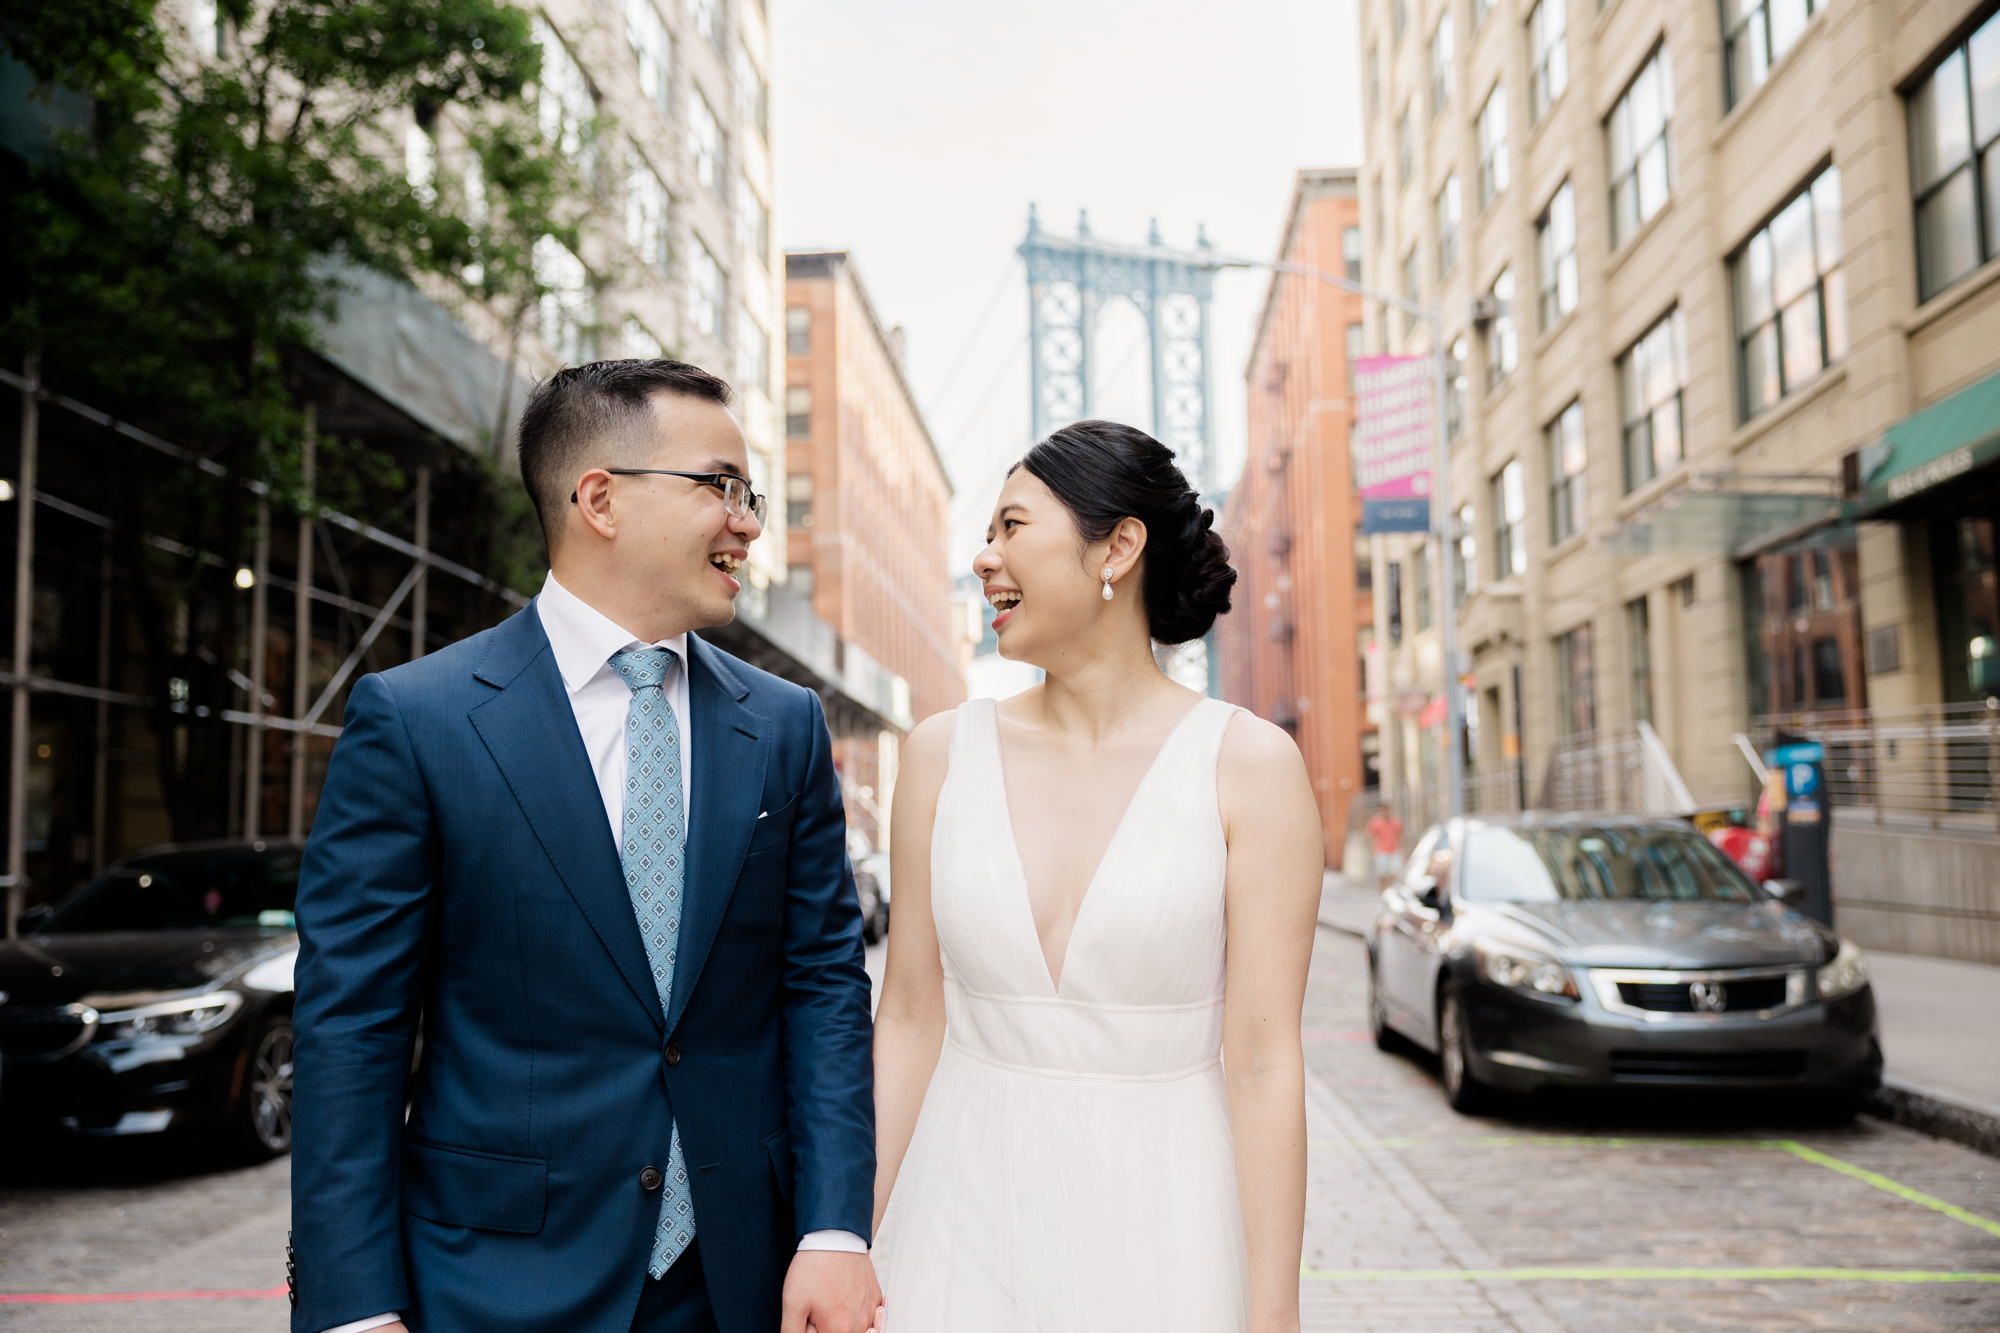 Wedding Photographers and What to Look For When Hiring One in New York